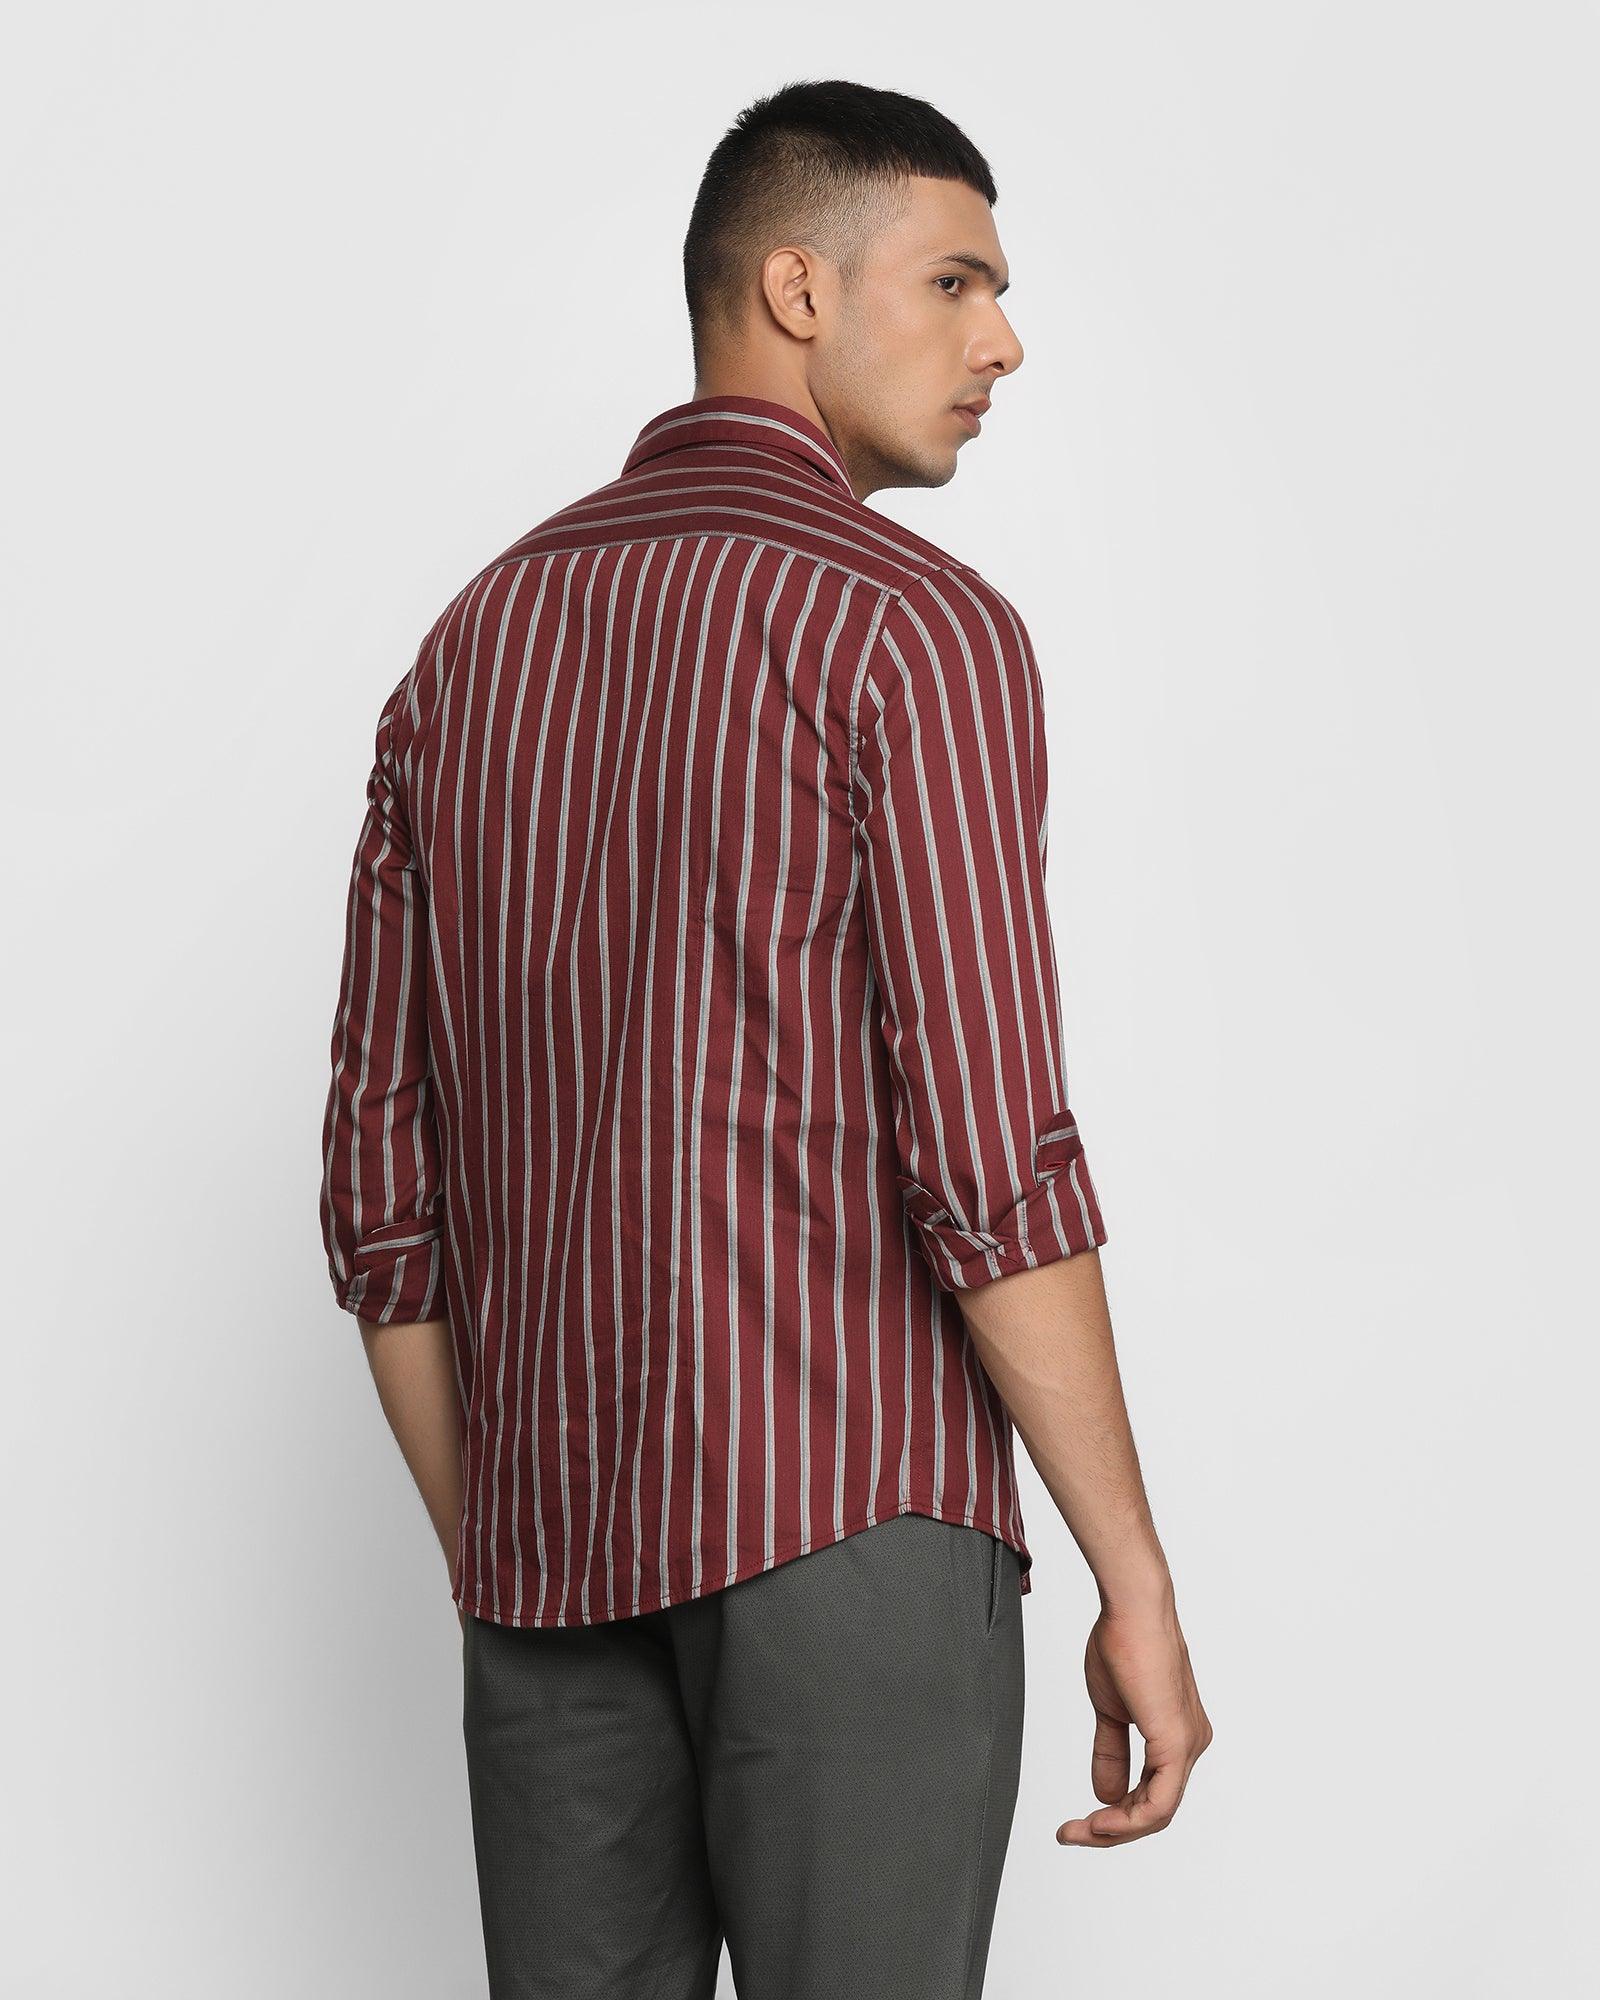 Casual Red Striped Shirt - Seatle